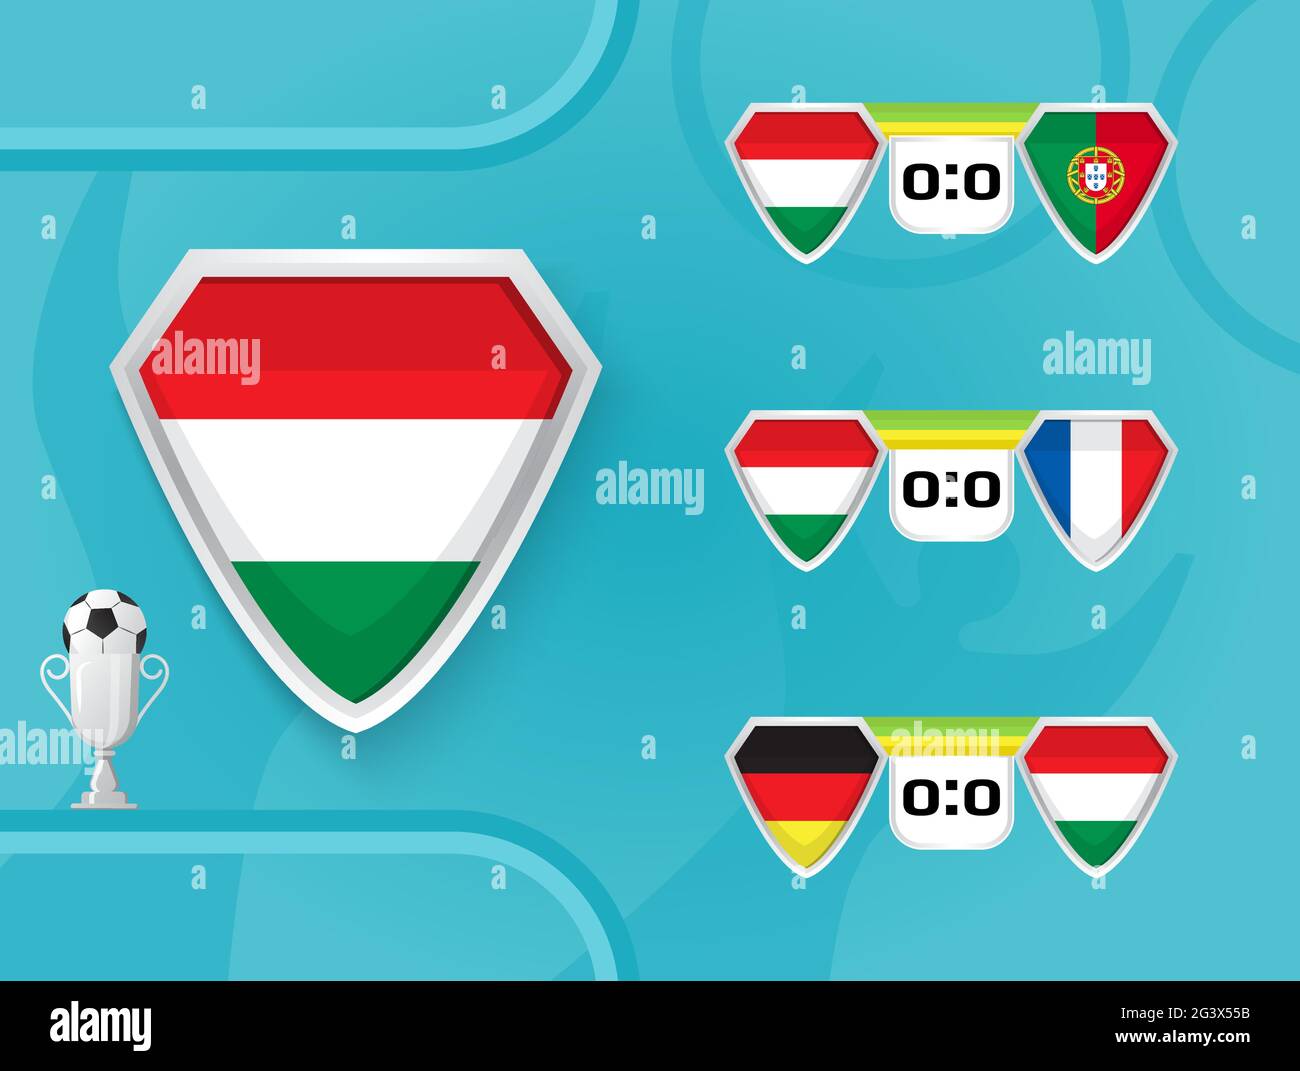 Schedule of national football team of Hungary matches in the European Championship 2020. Shields with the flag of Hungary, Portugal, France, Germany. Stock Vector